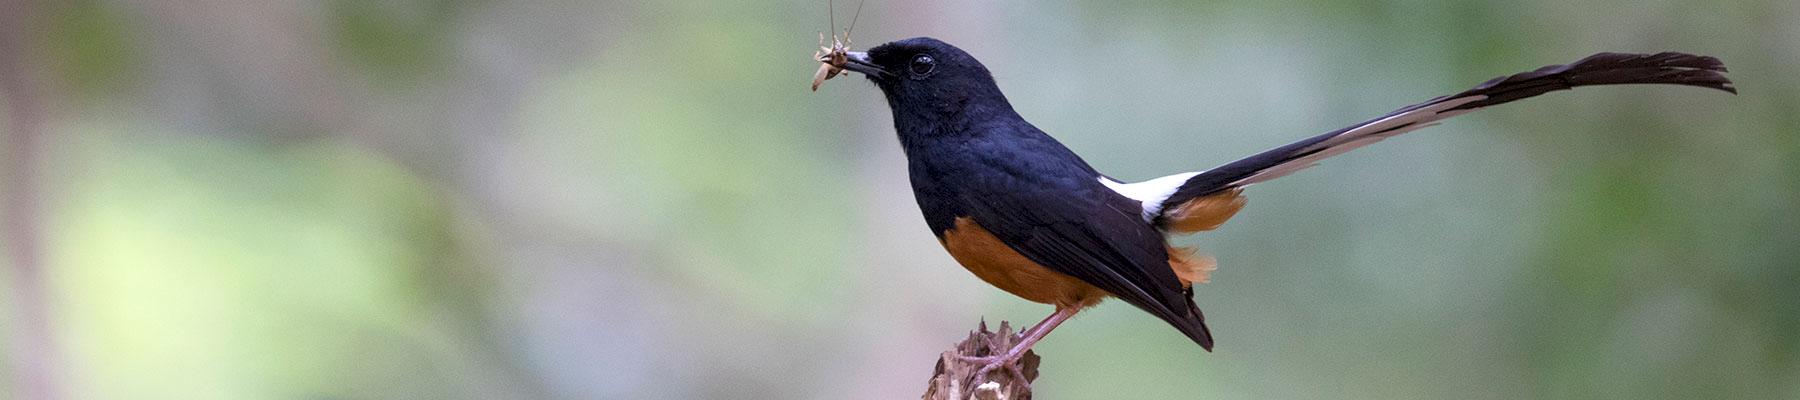 New Study Finds Bali A Veritable Emporium For Birds From Around